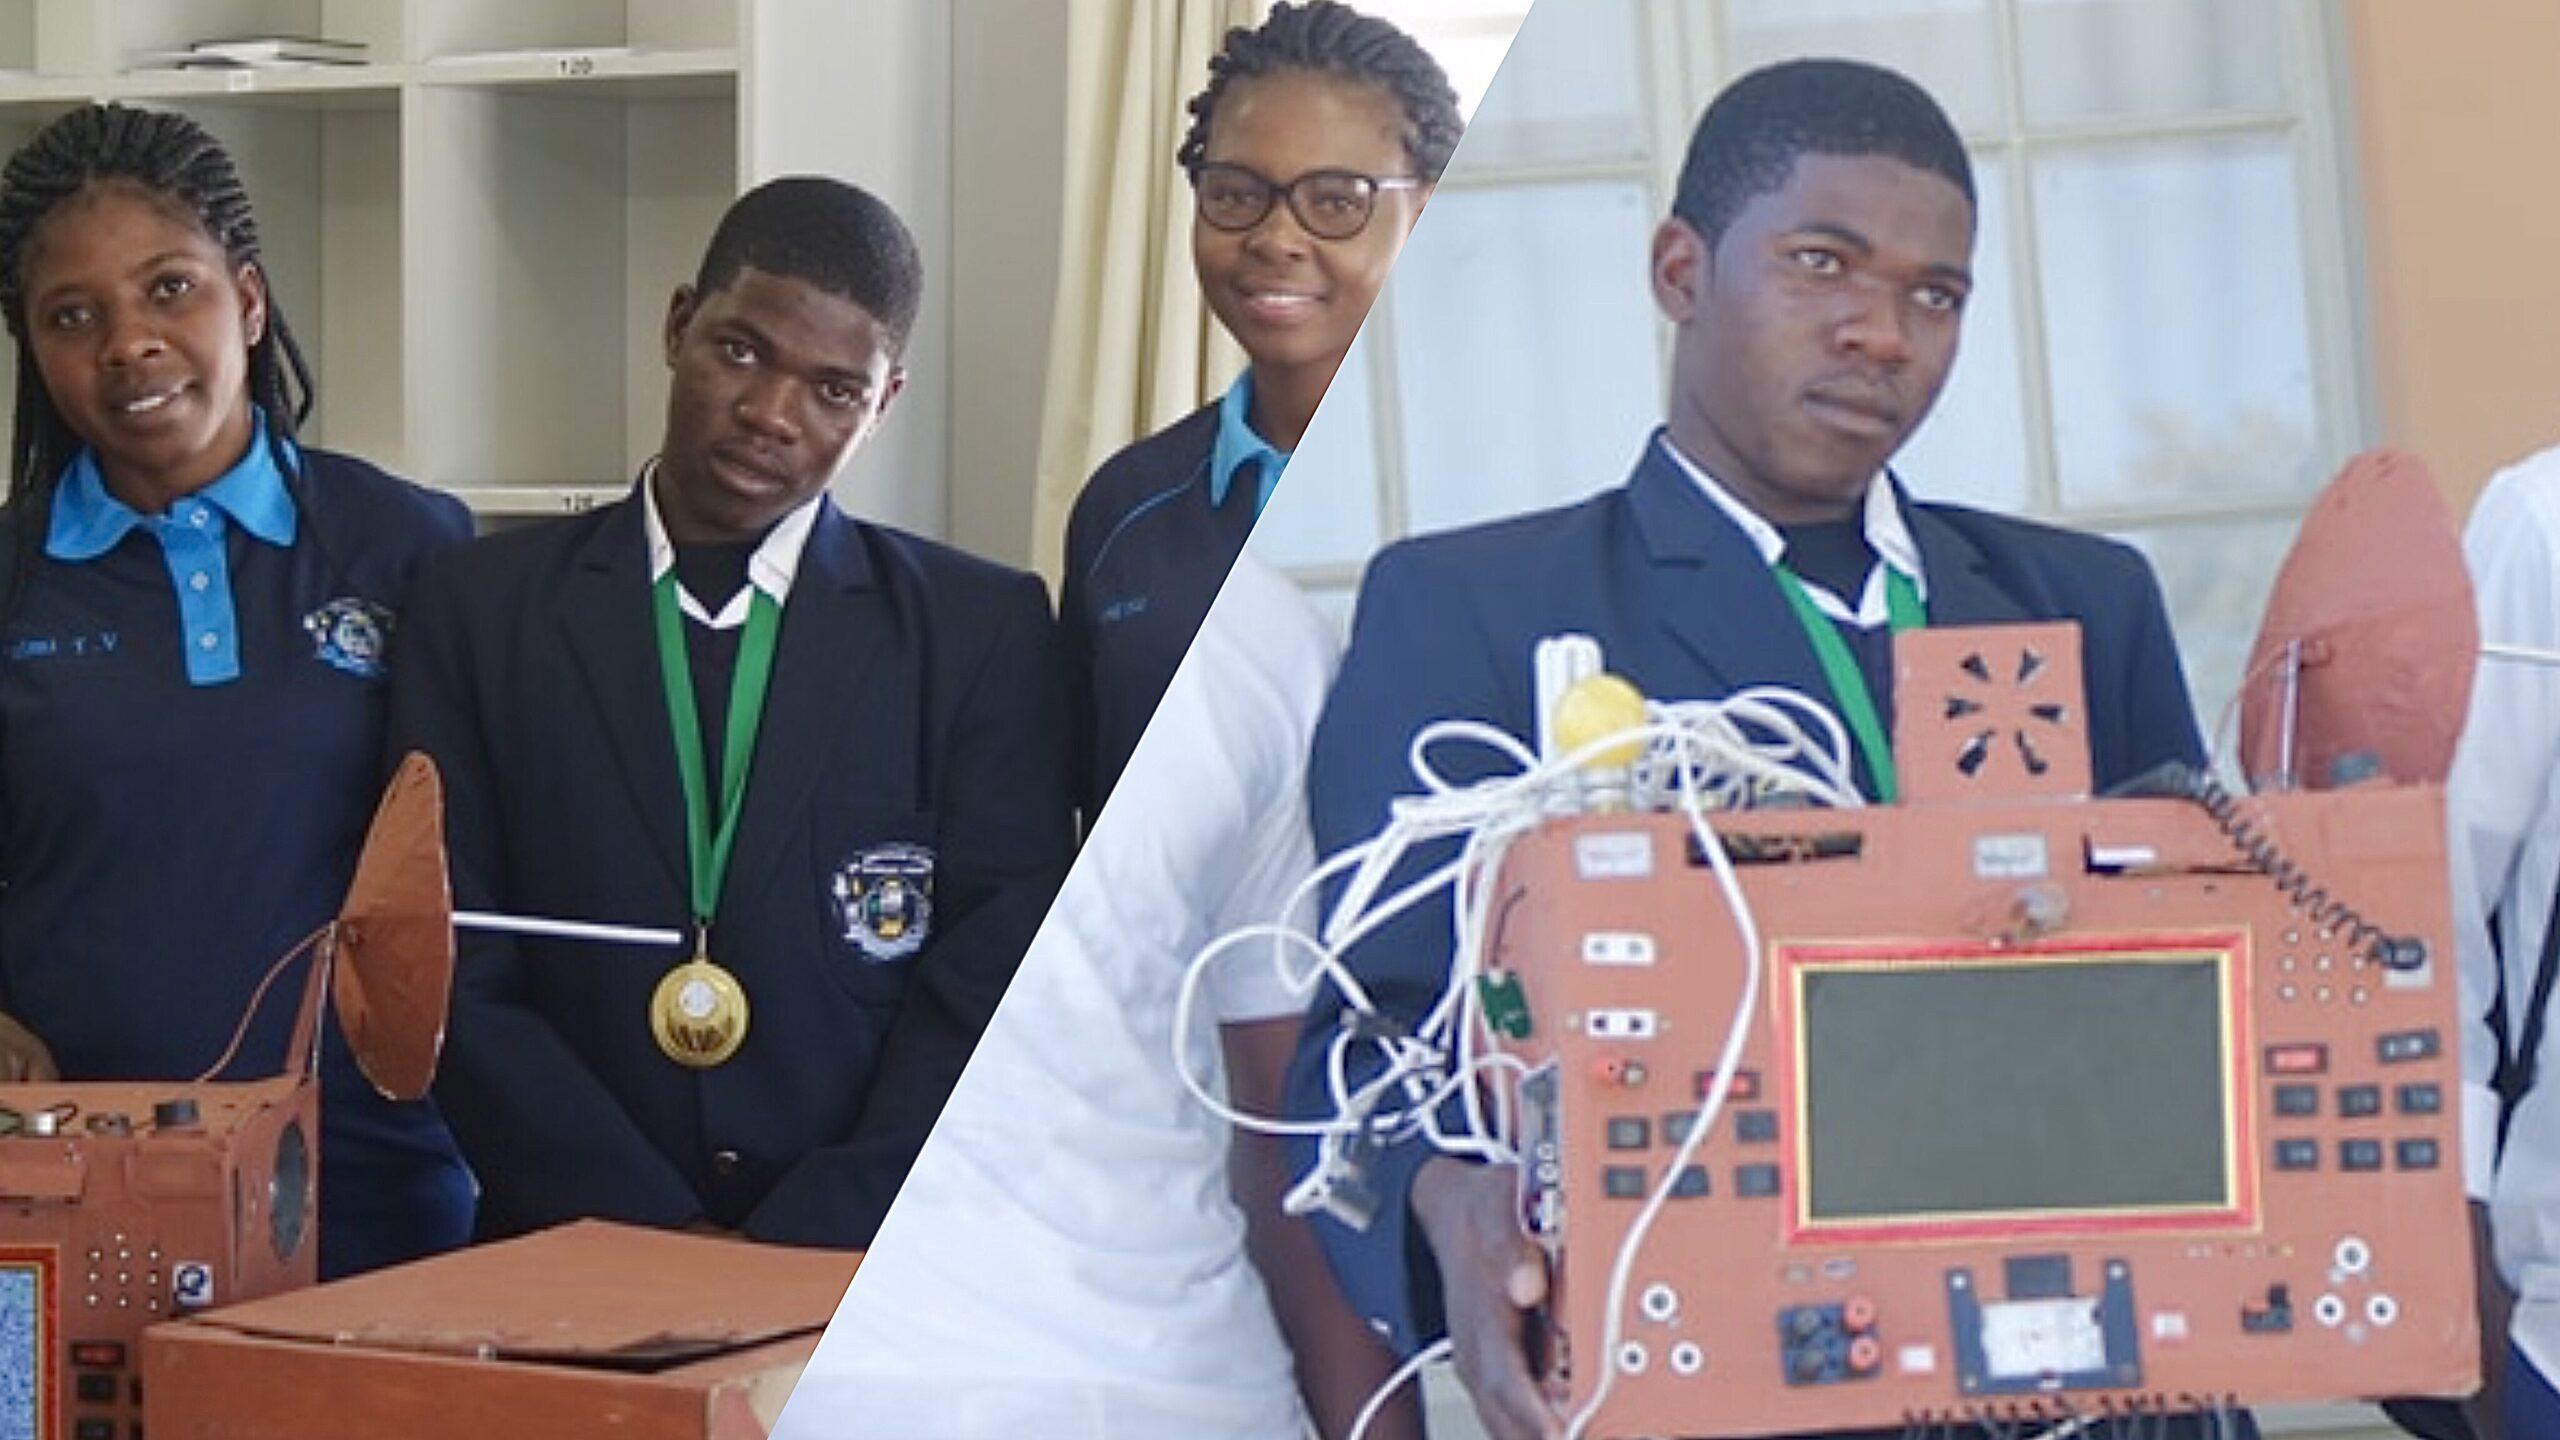 A Teenager From Namibia Invents A “Sim-Less” and “Airtime-Free” Phone